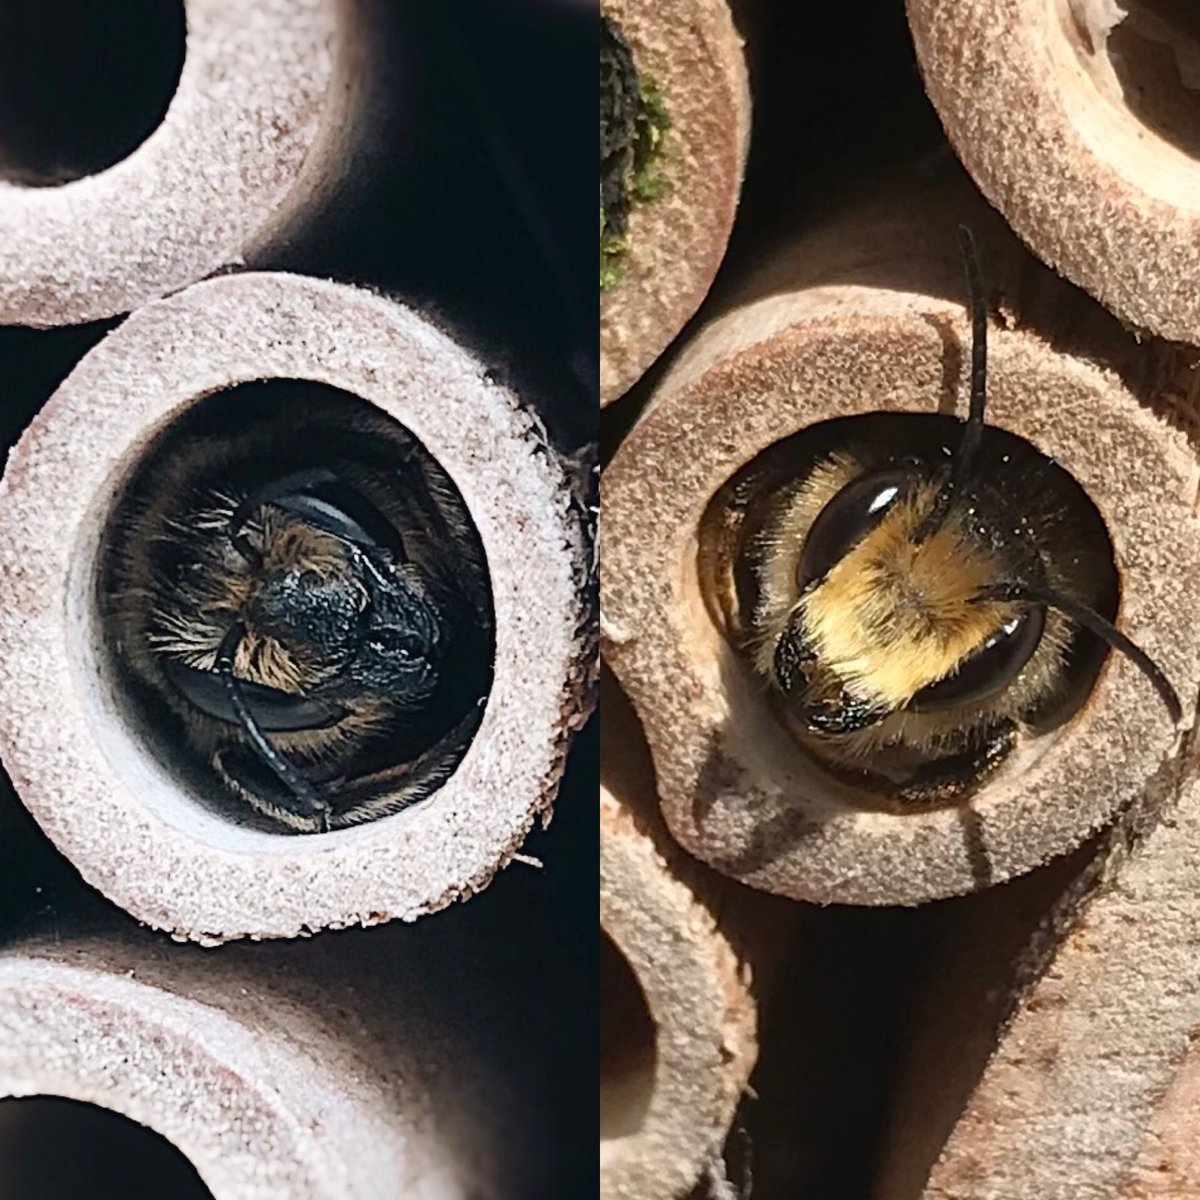 Megachile (Leafcutter) bees 💛
Female on the left and male on the  right.

Notice how much he much more pale fluff he has on his face than she does – a quick way of determining which is which! 

#SolitaryBeeWeek